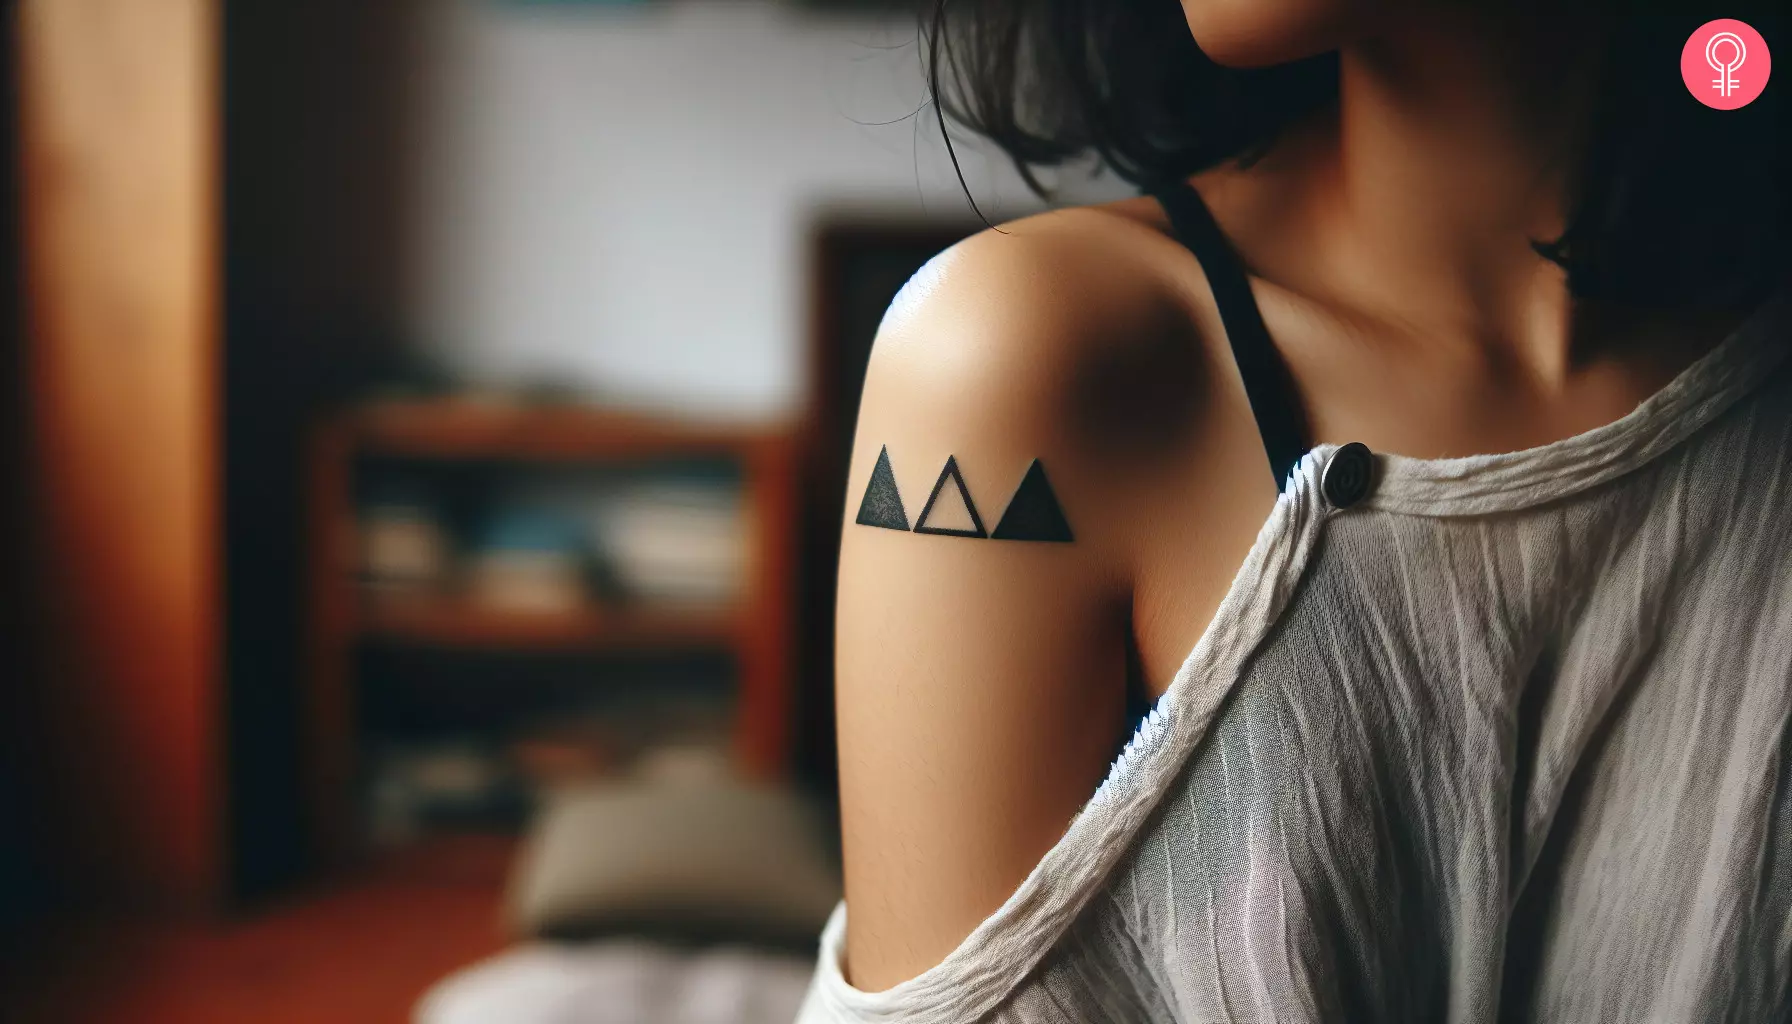 A woman with a past present future triangle tattoo on her upper arm